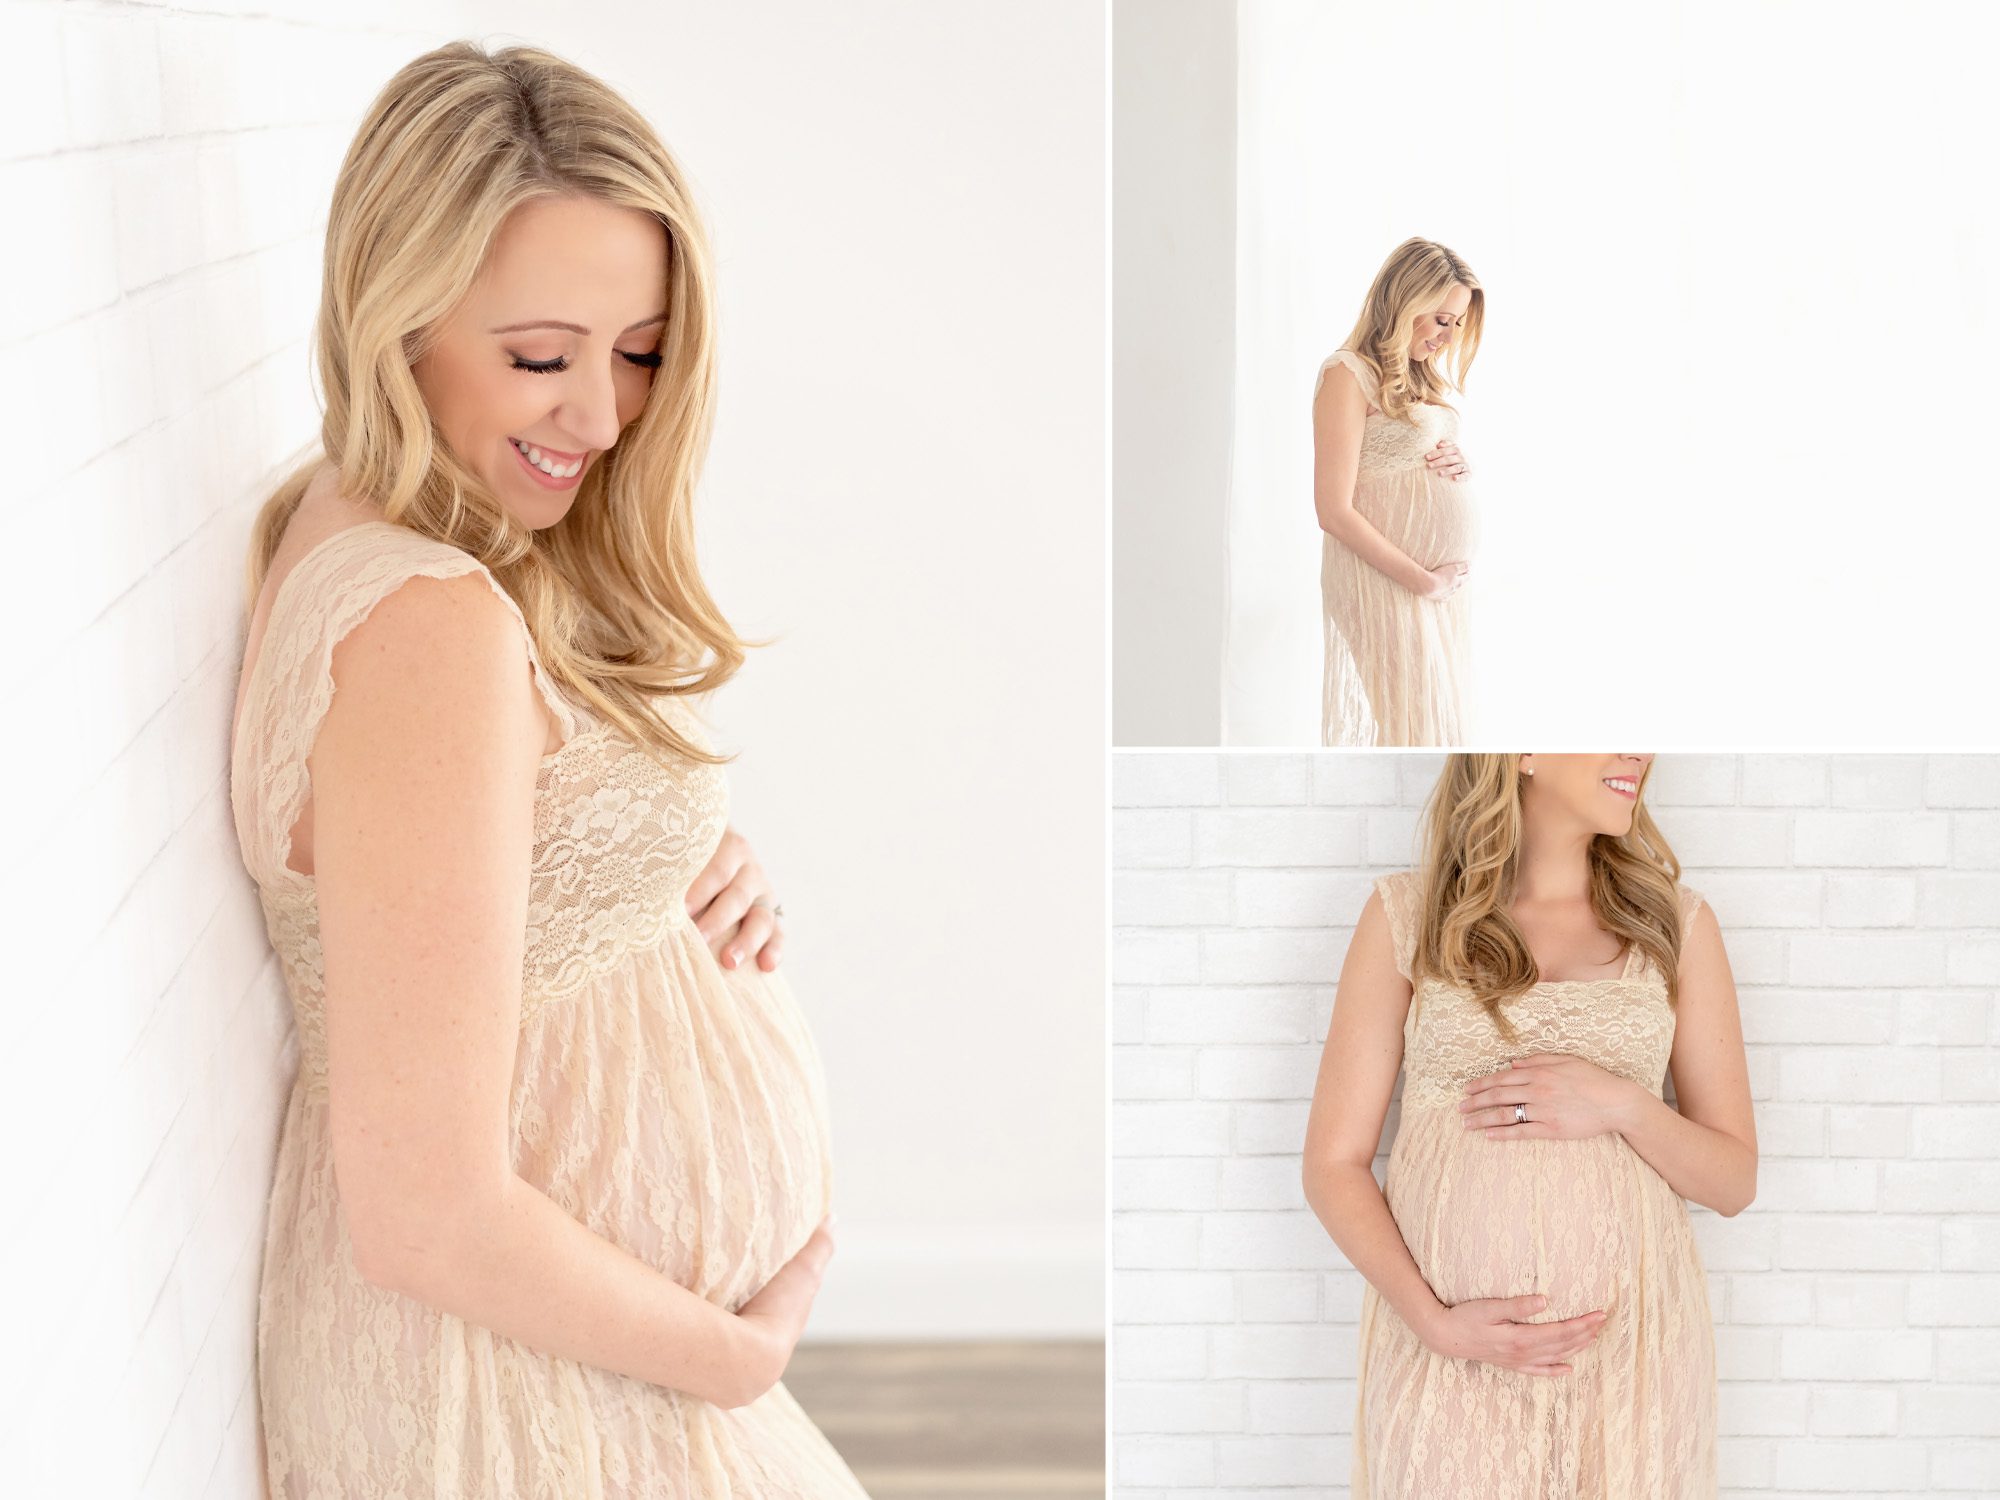 A young couple in a bright white studio getting maternity portraits done for their first child.